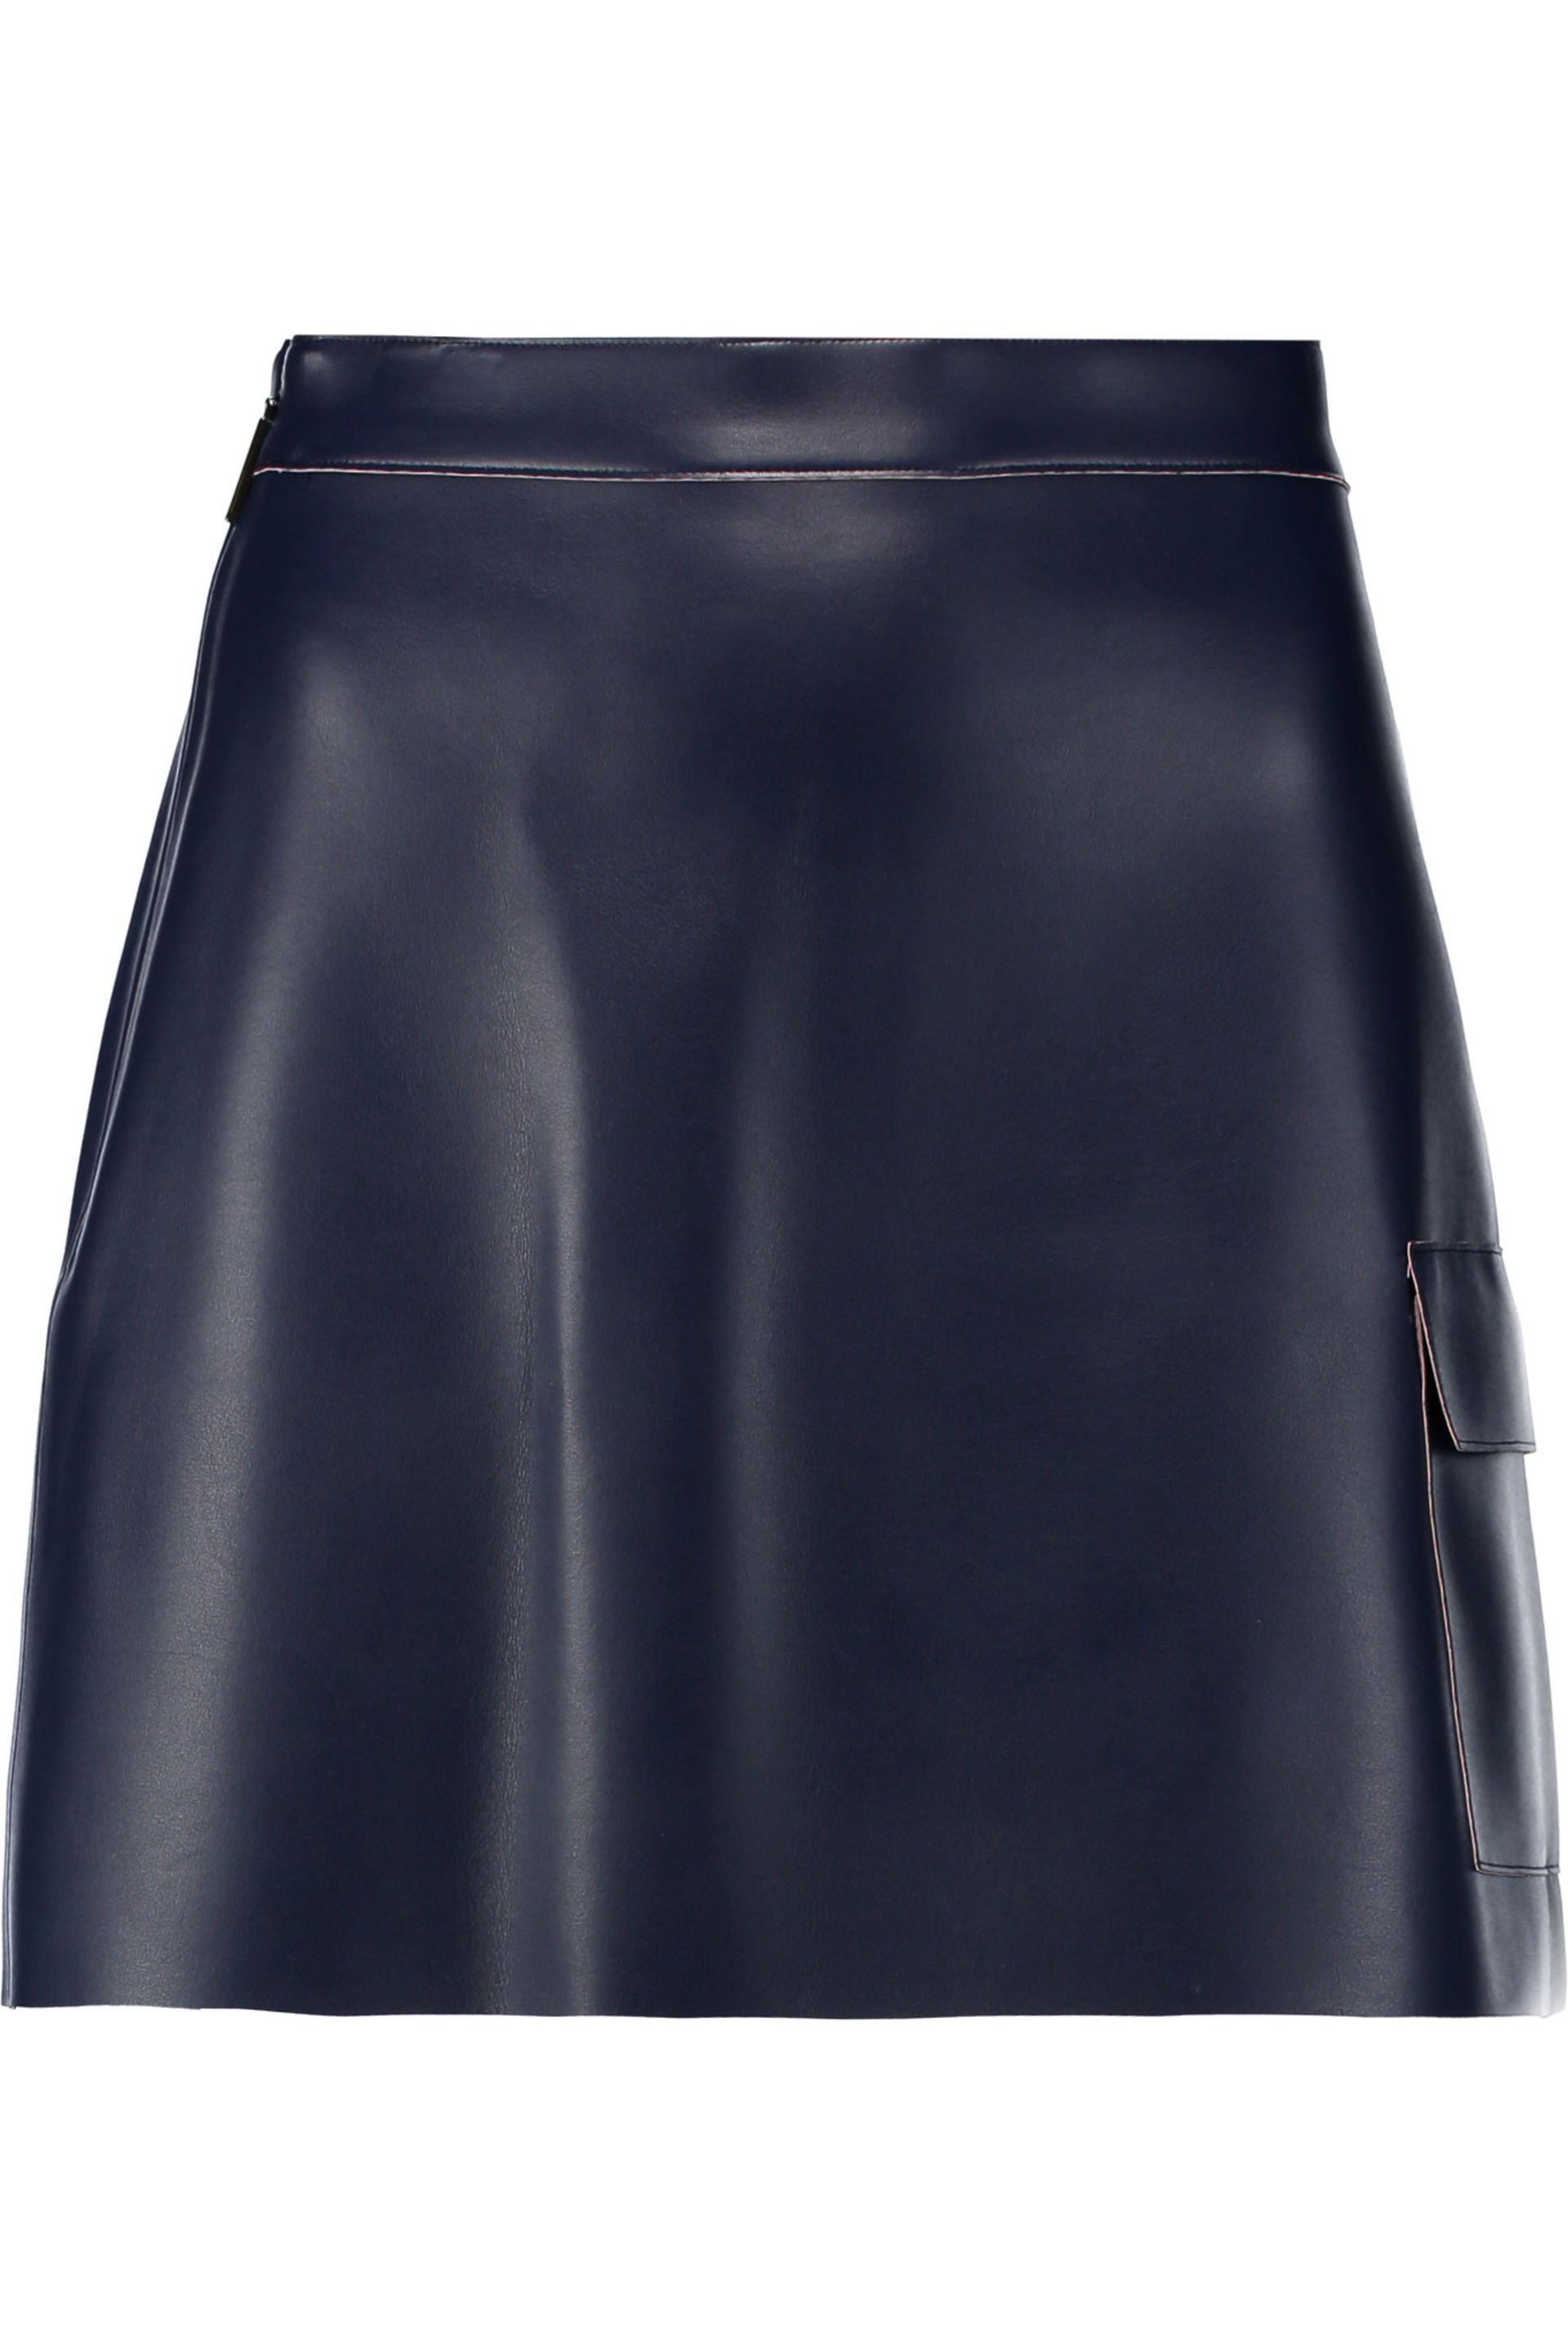 MSGM Faux-Leather Mini Skirt in Blue - Lyst